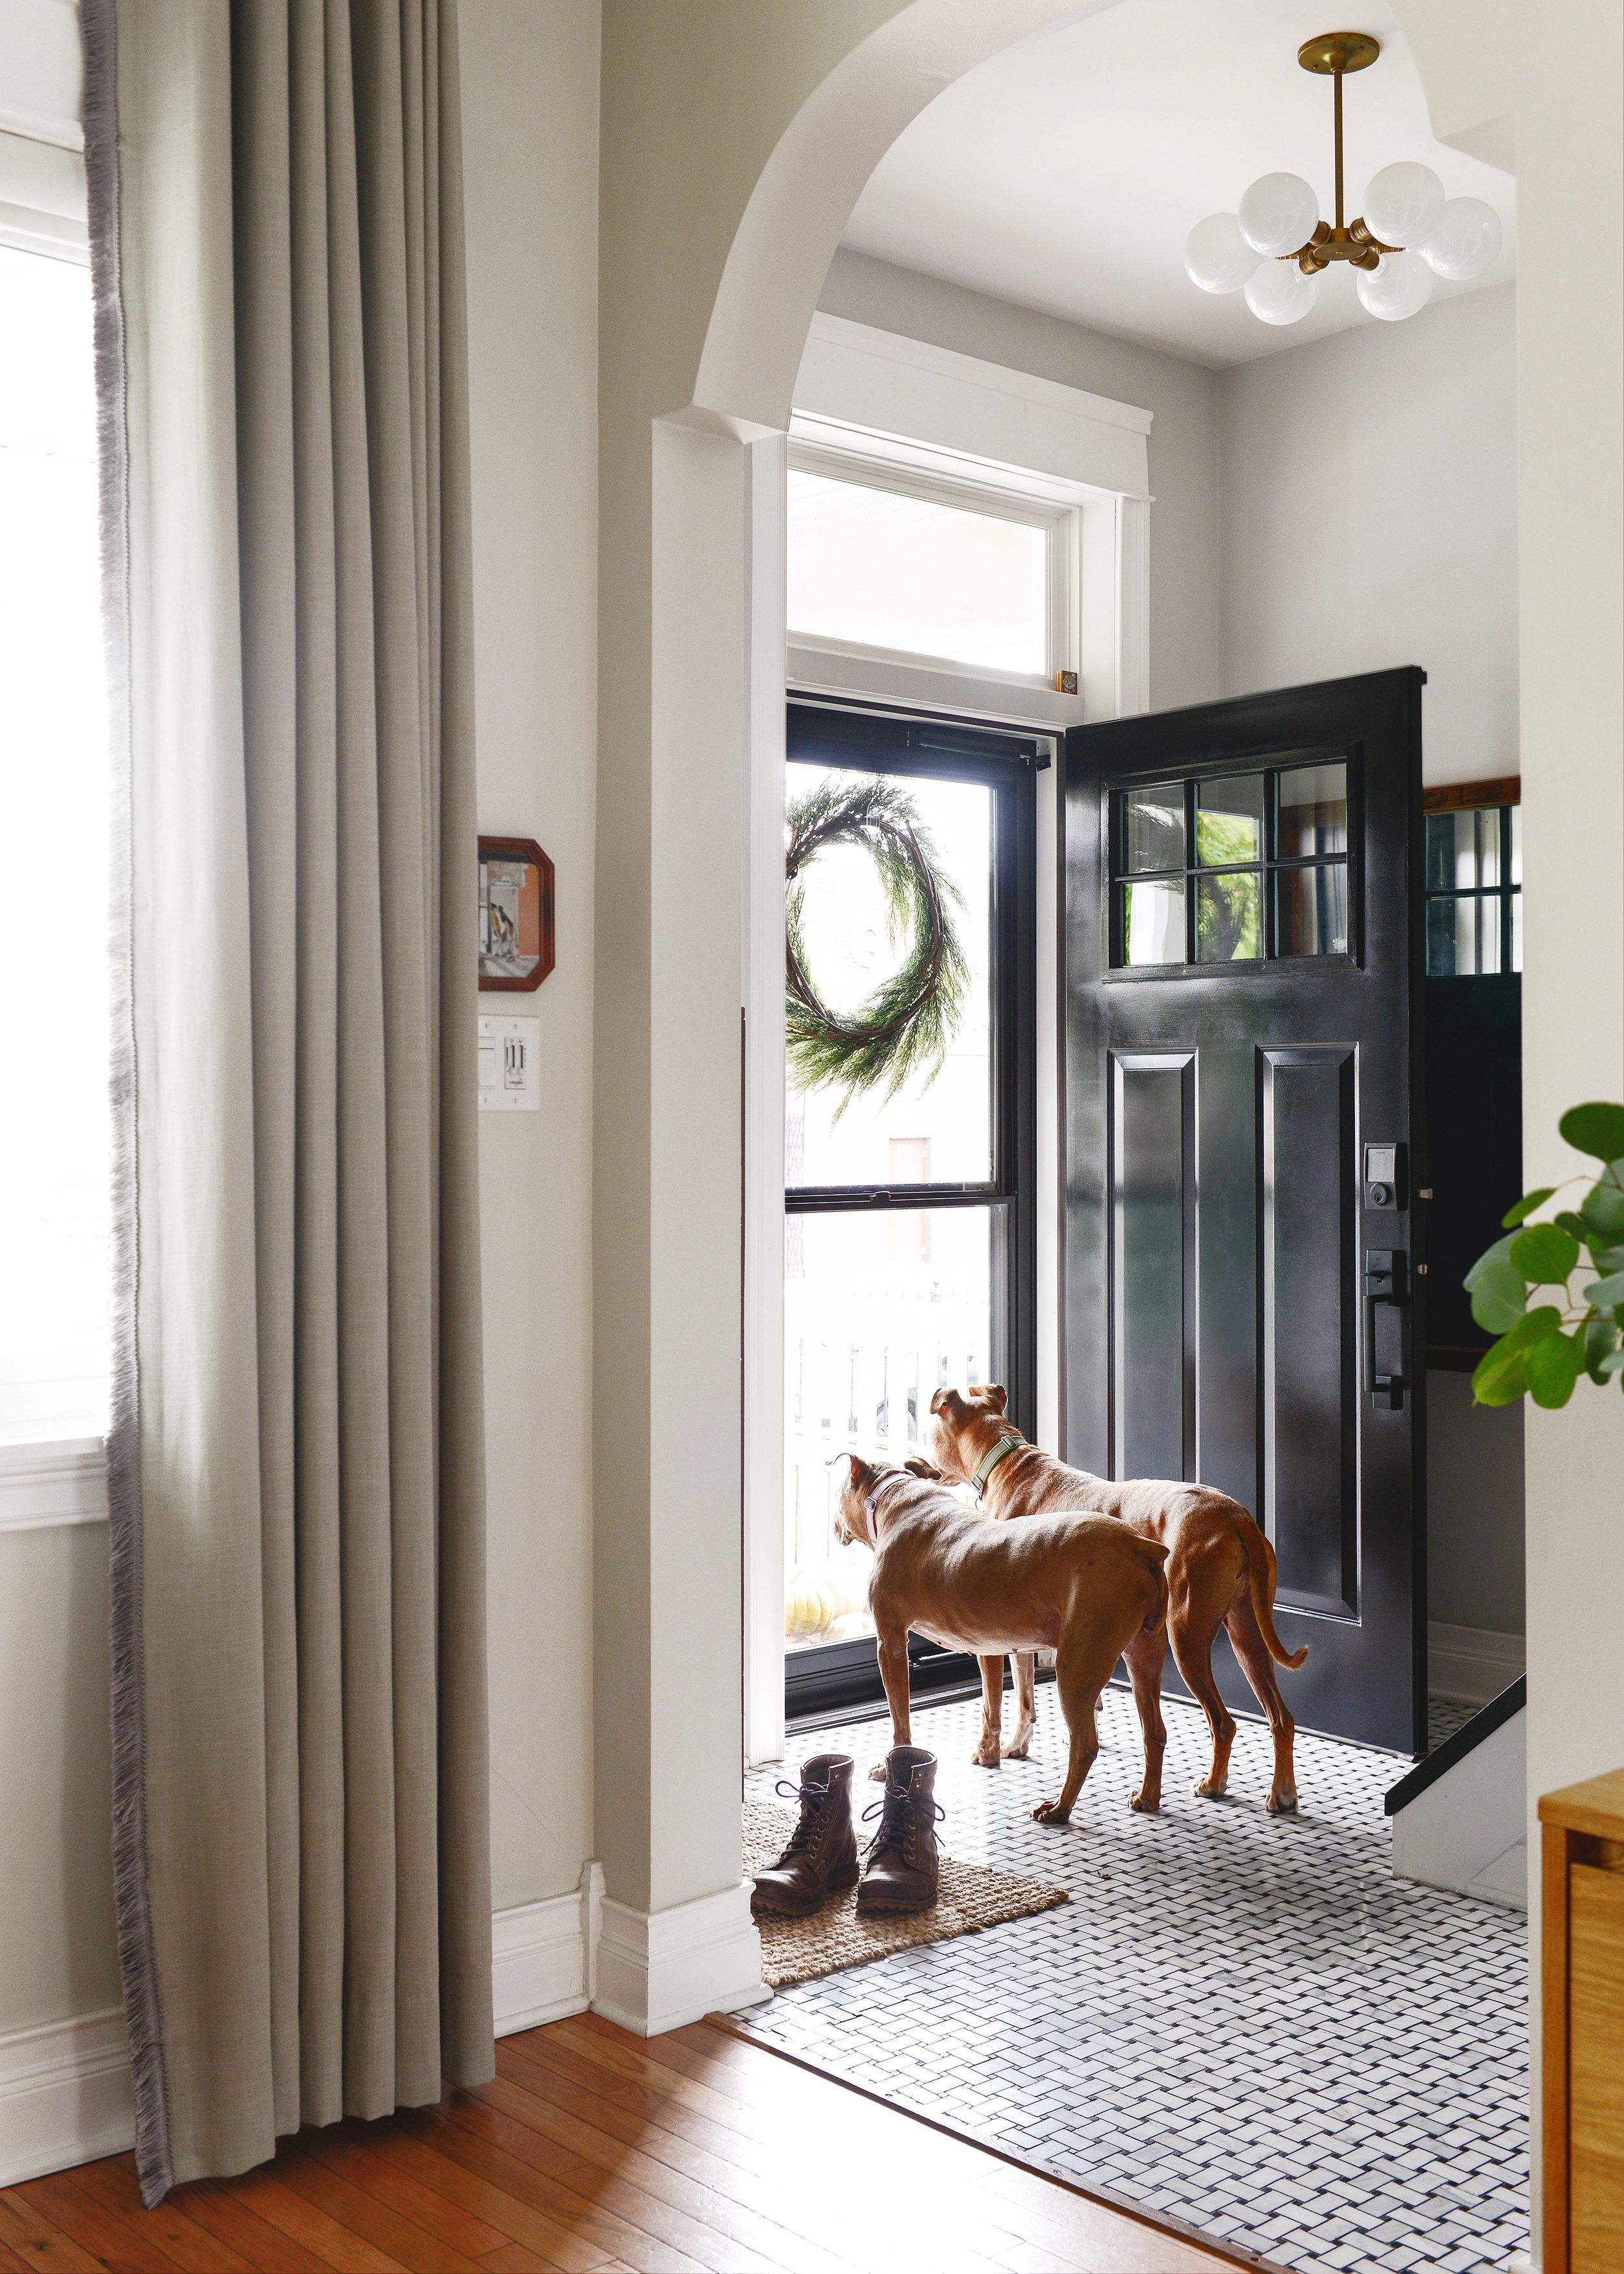 Jack and CC looking out the storm door, standing inside our entryway: The 5 ingredients to a fall front porch refresh! via Yellow Brick Home